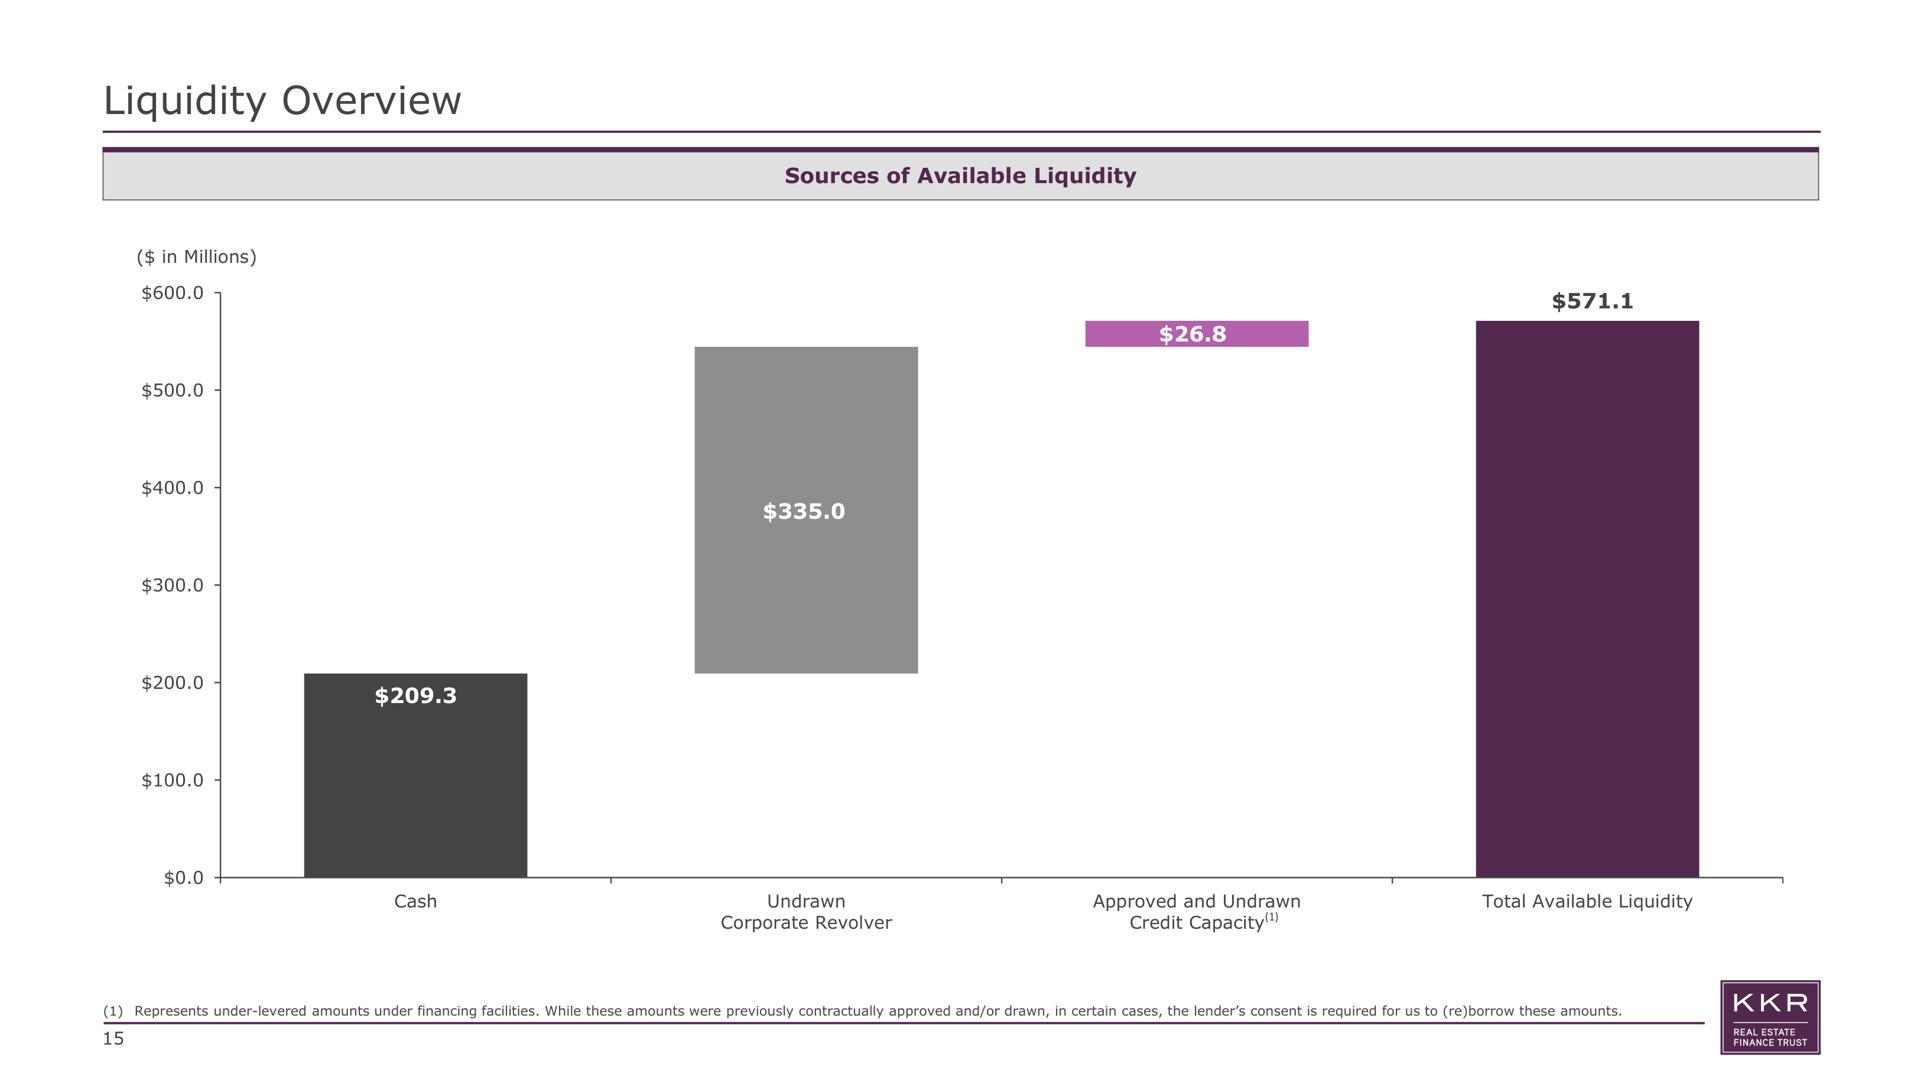 liquidity overview sources of available corporate revolver credit capacity | KKR Real Estate Finance Trust